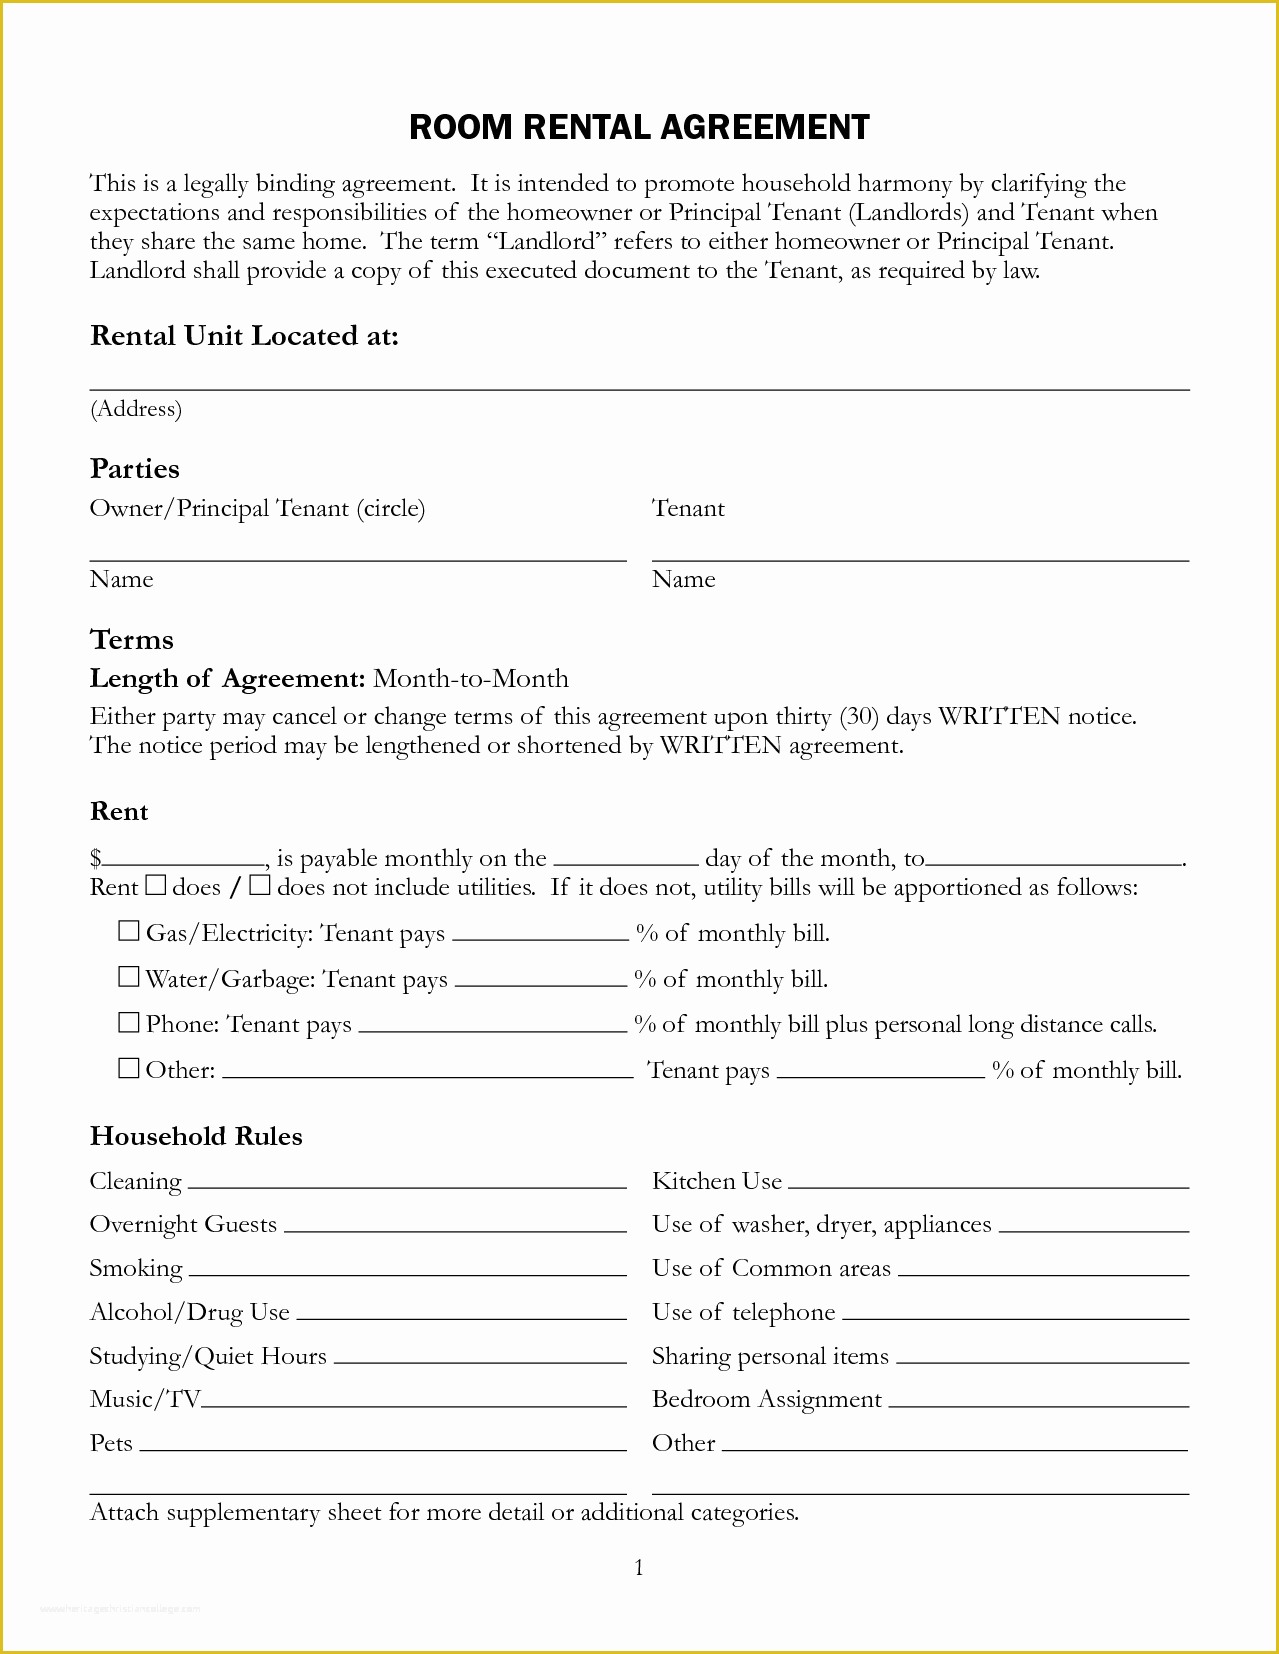 Free Nc Lease Agreement Template Of 6 Sample Room Rental Agreement